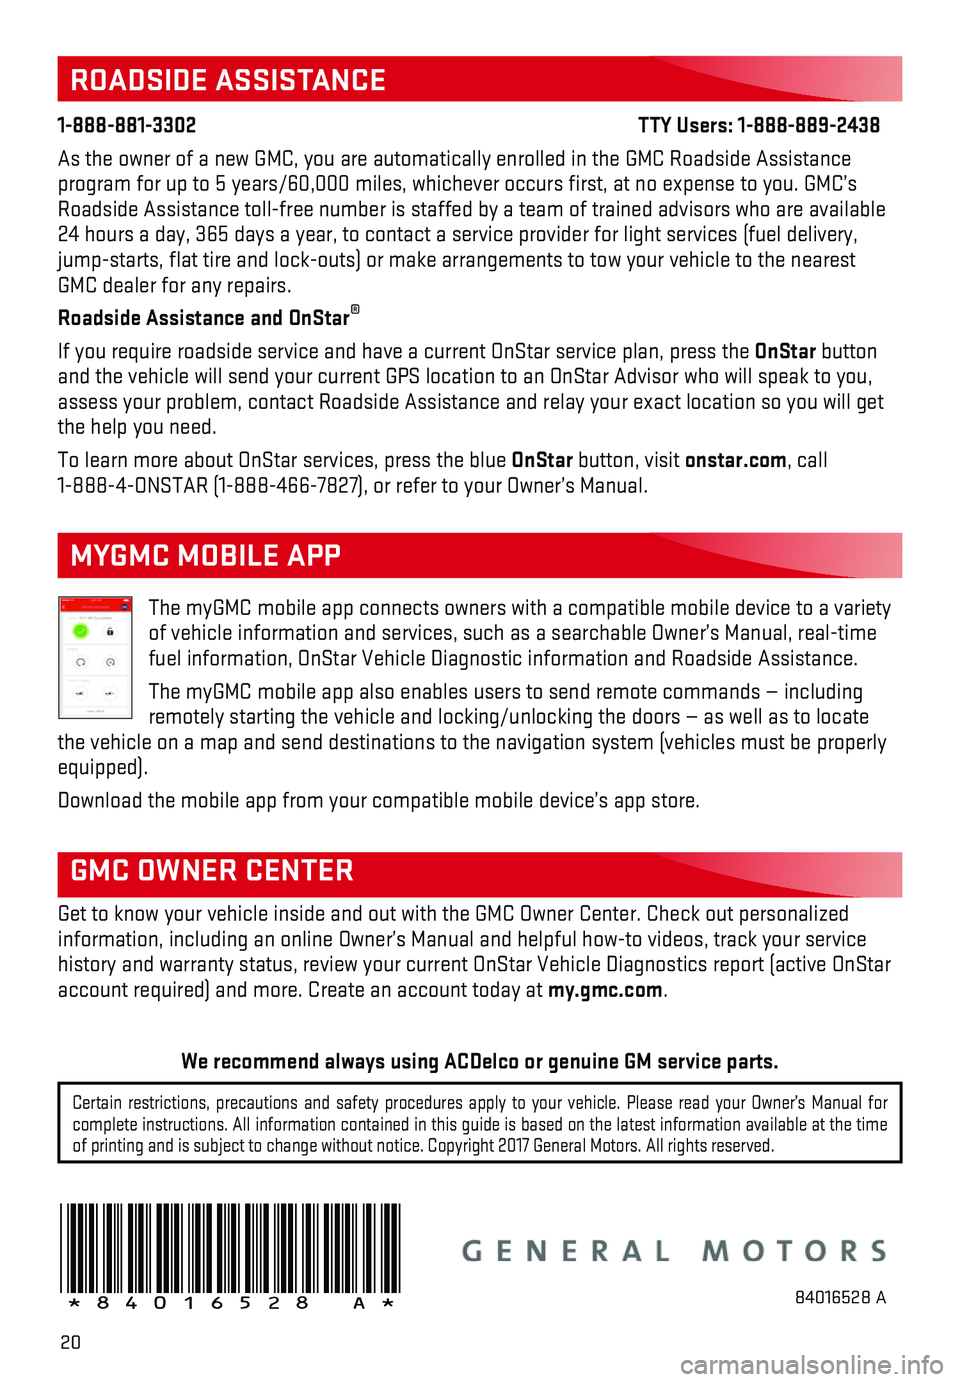 GMC SIERRA 2018  Get To Know Guide 20
The myGMC mobile app connects owners with a compatible mobile device to \
a variety of vehicle information and services, such as a searchable Owner’s Man\
ual, real-time fuel information, OnStar 